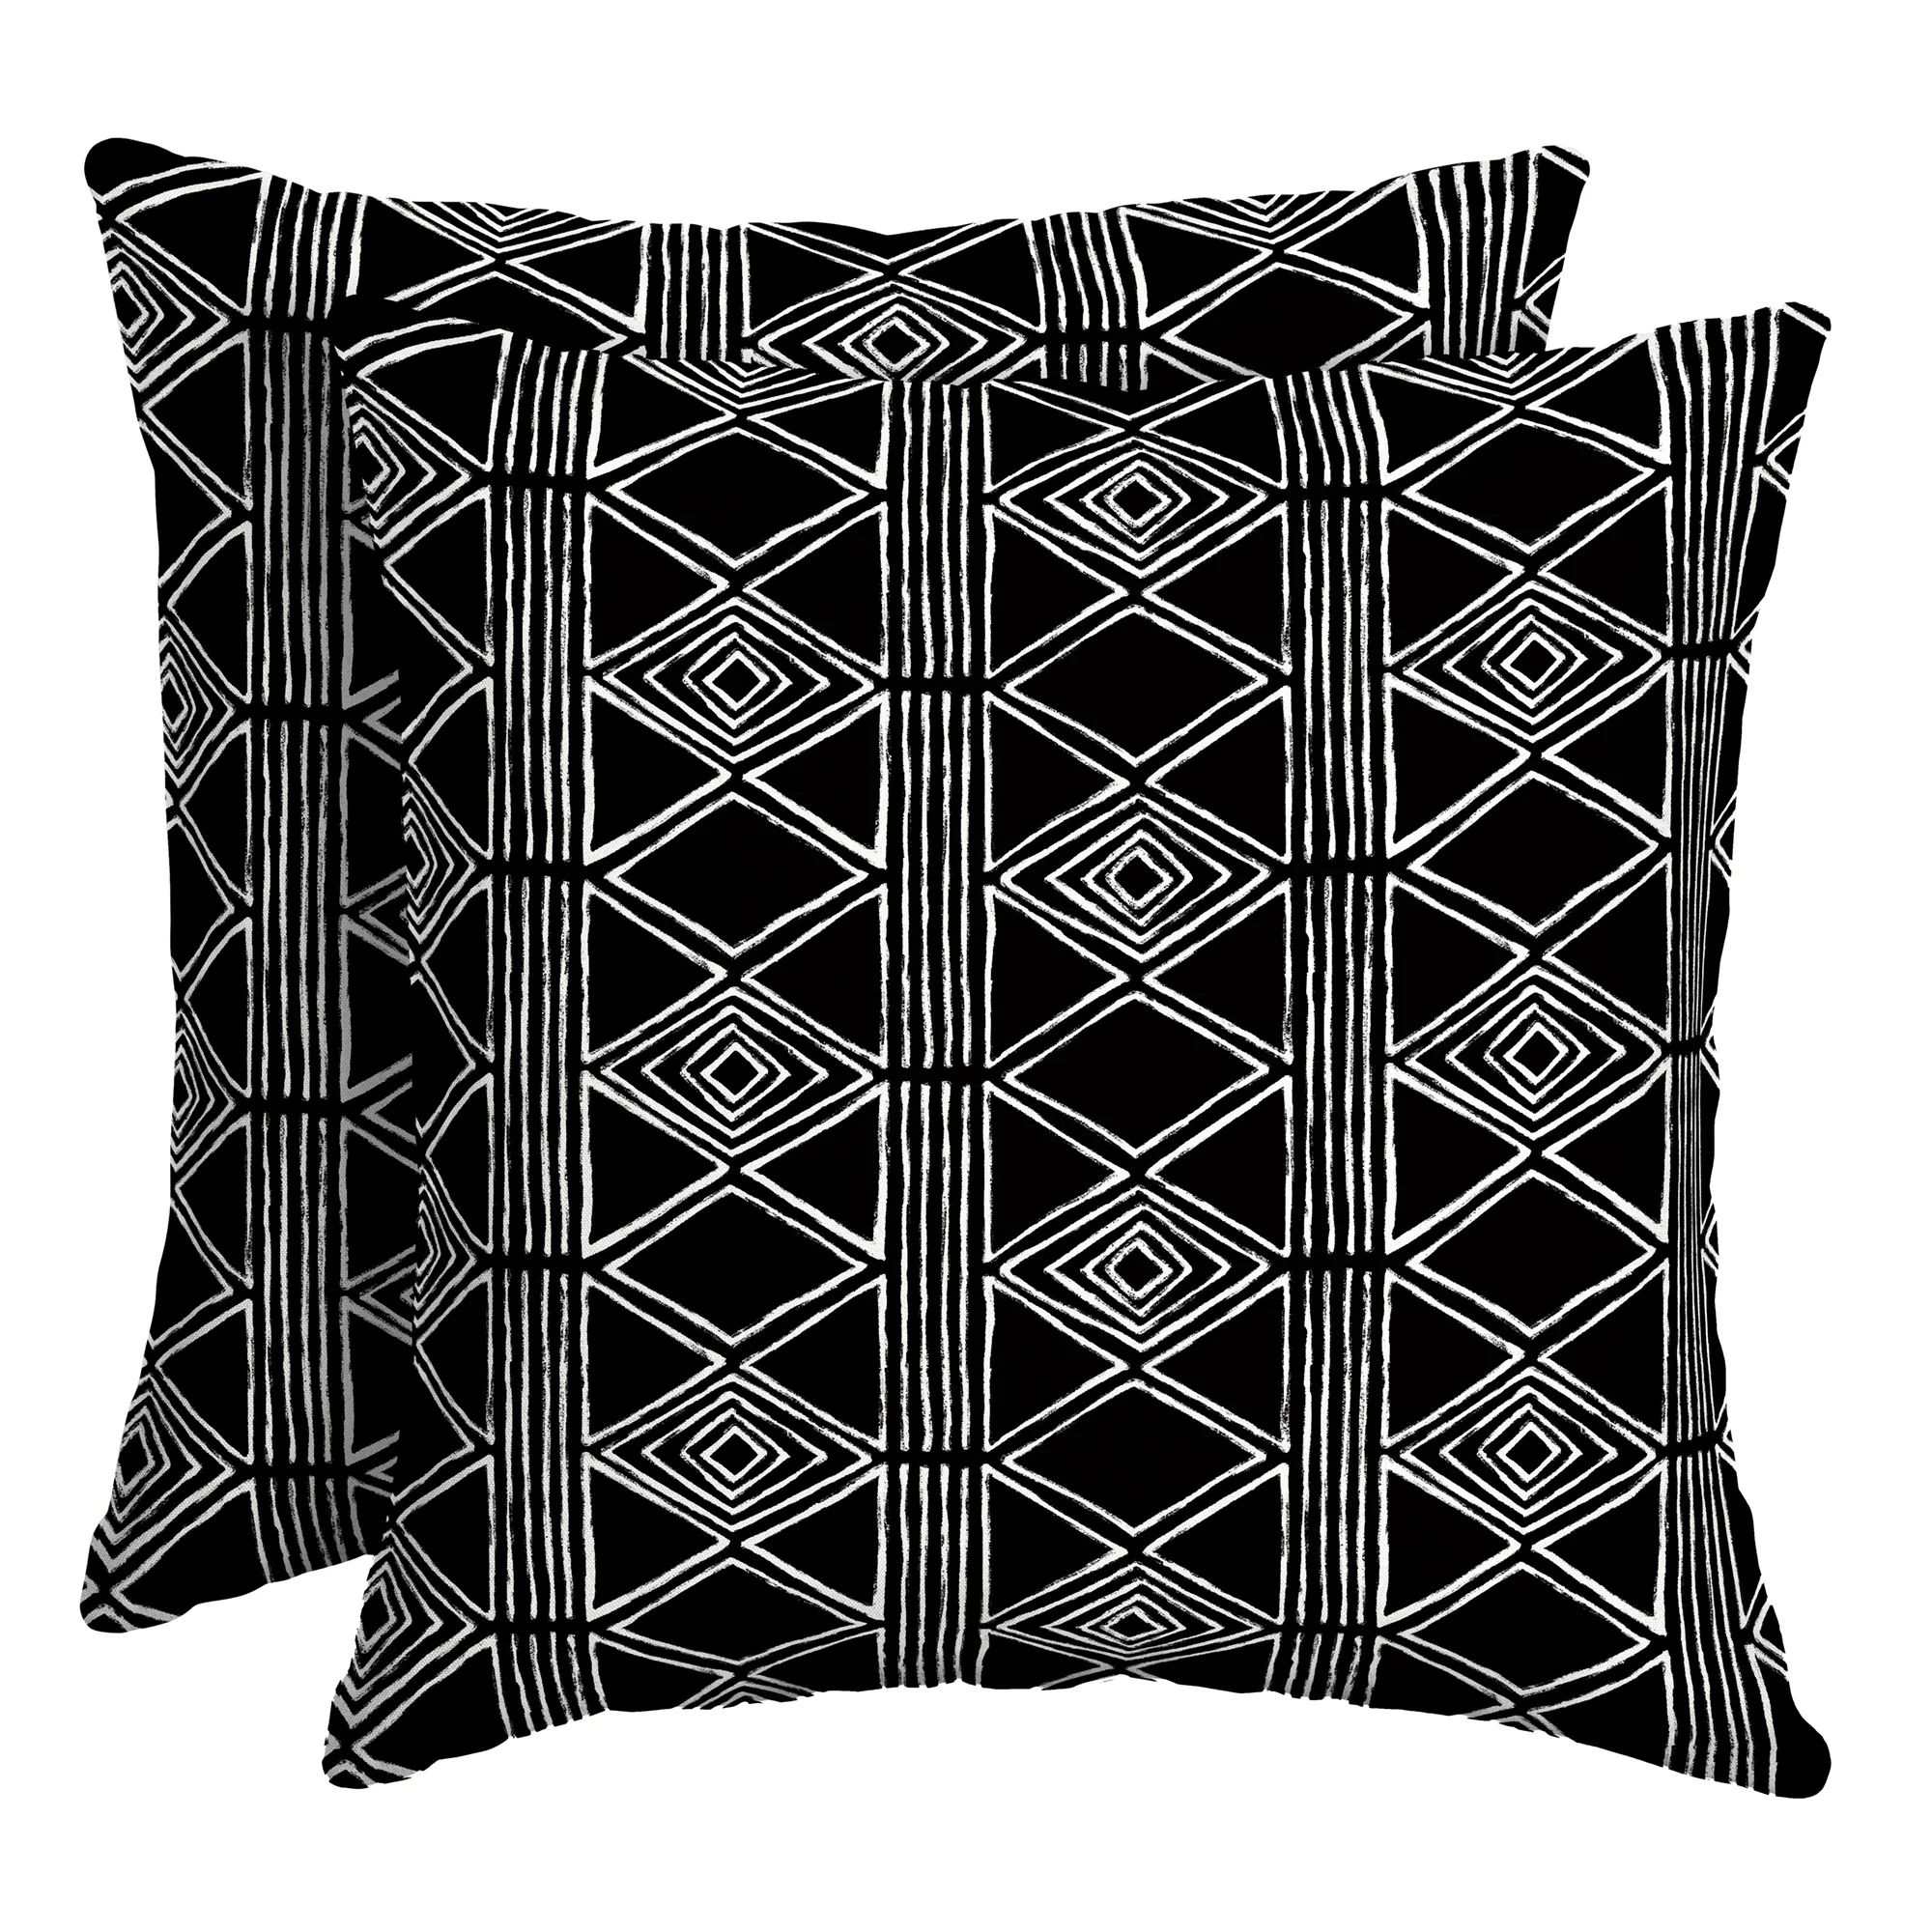 Arden Selections 16 x 16 in Outdoor Square Throw Pillow, Black Global Stripe (2-pack) | Walmart (US)